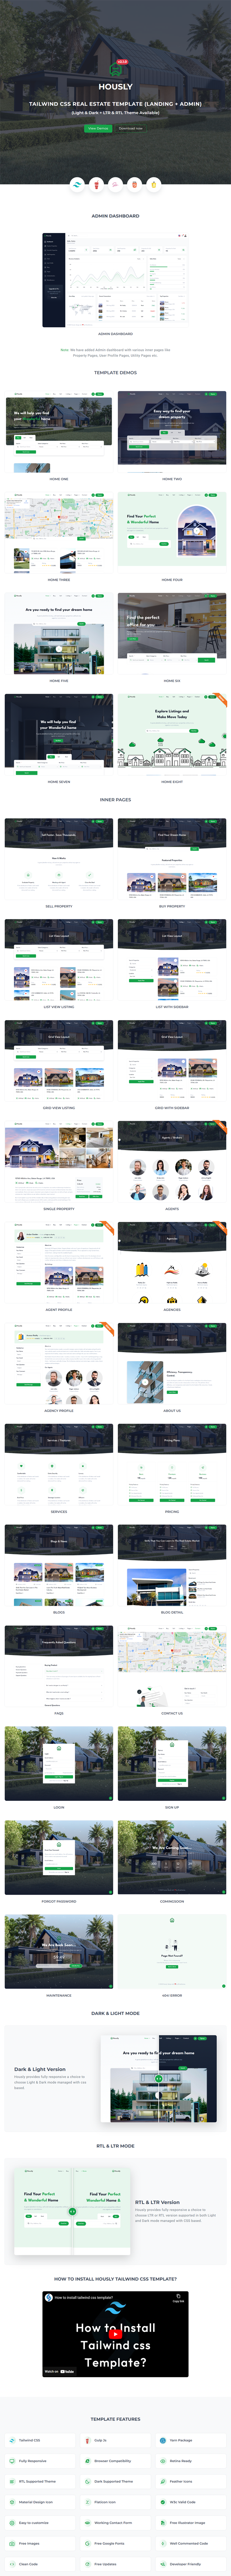 Hously - Tailwind CSS Real Estate Landing & Admin Dashboard Template - 5